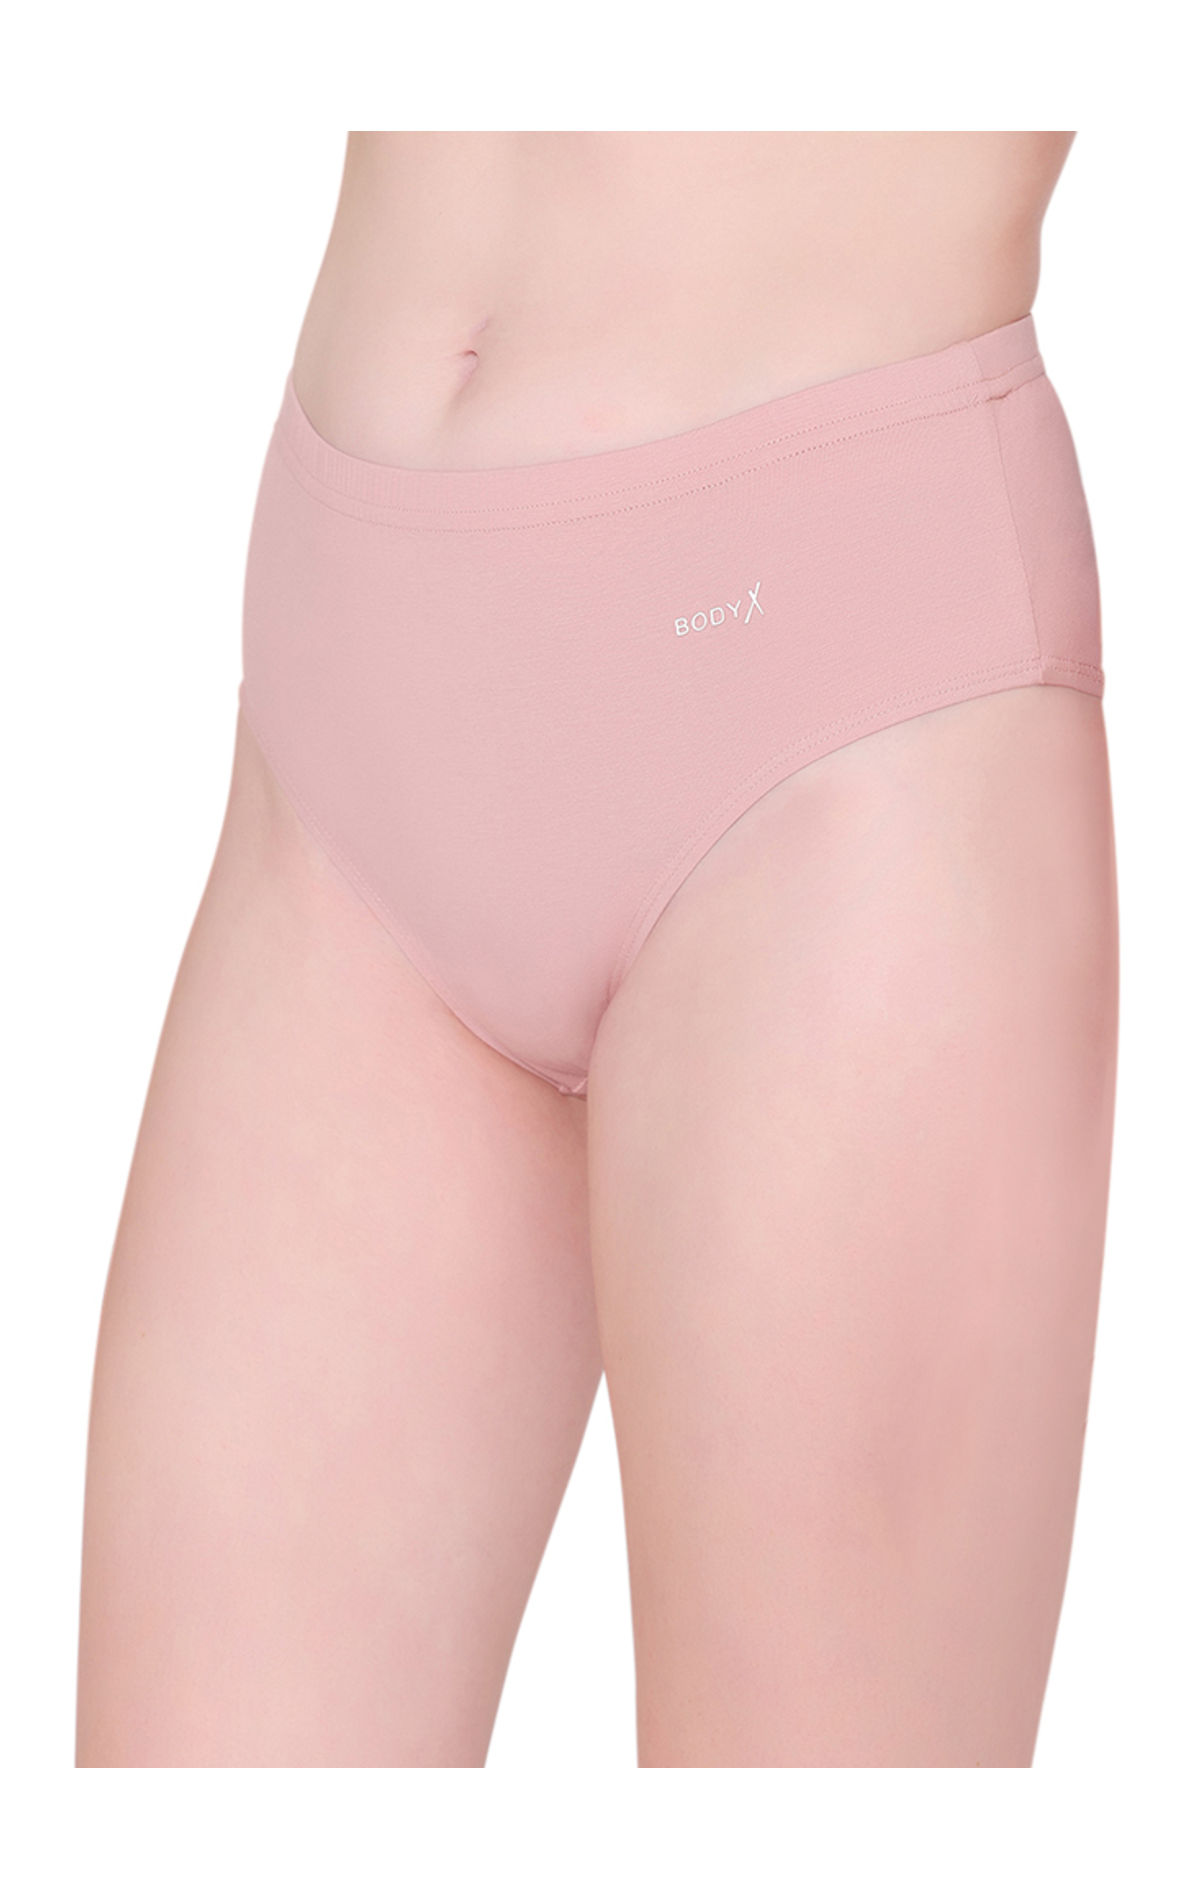 Bodysense Women's Hipster Panties, Mid, Size: Small to 3XL at Rs 65/piece  in Mohali